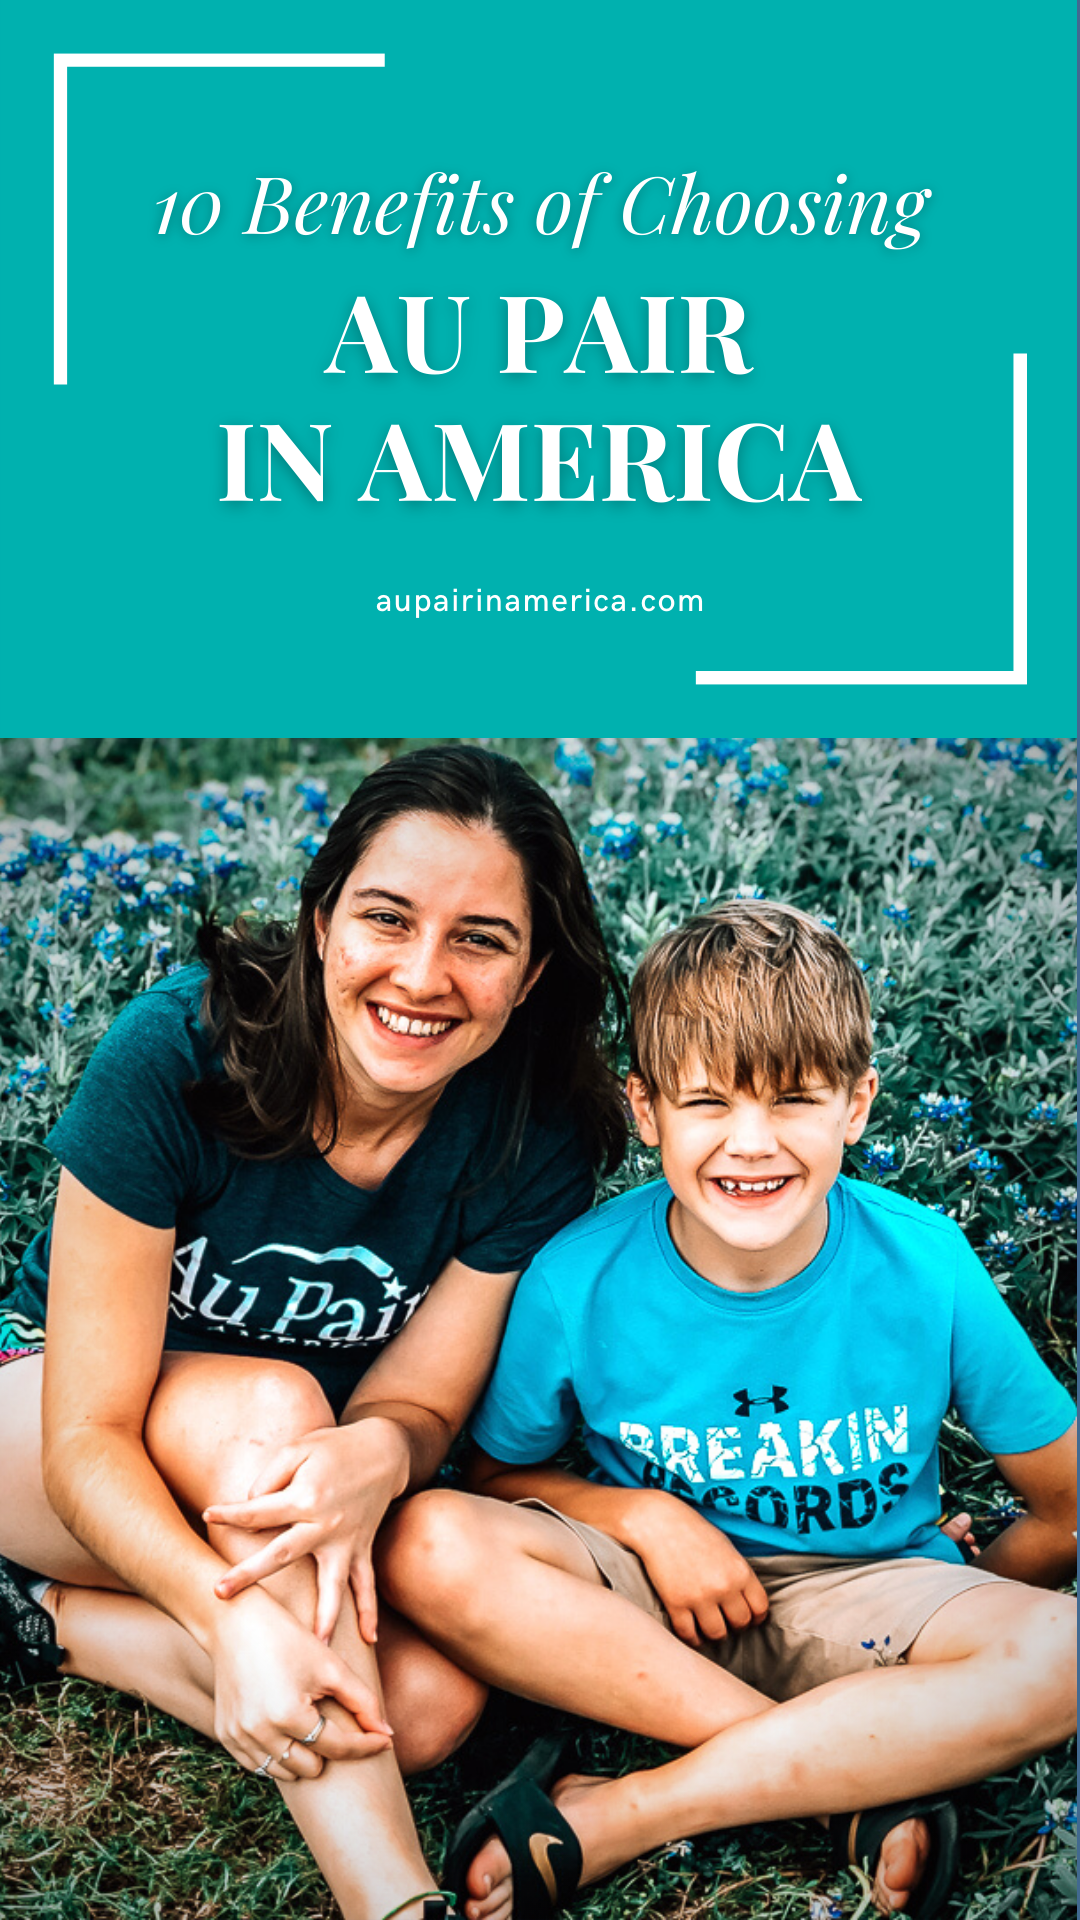 Why Choose Au Pair in America vs. other cultural child care programs for children?